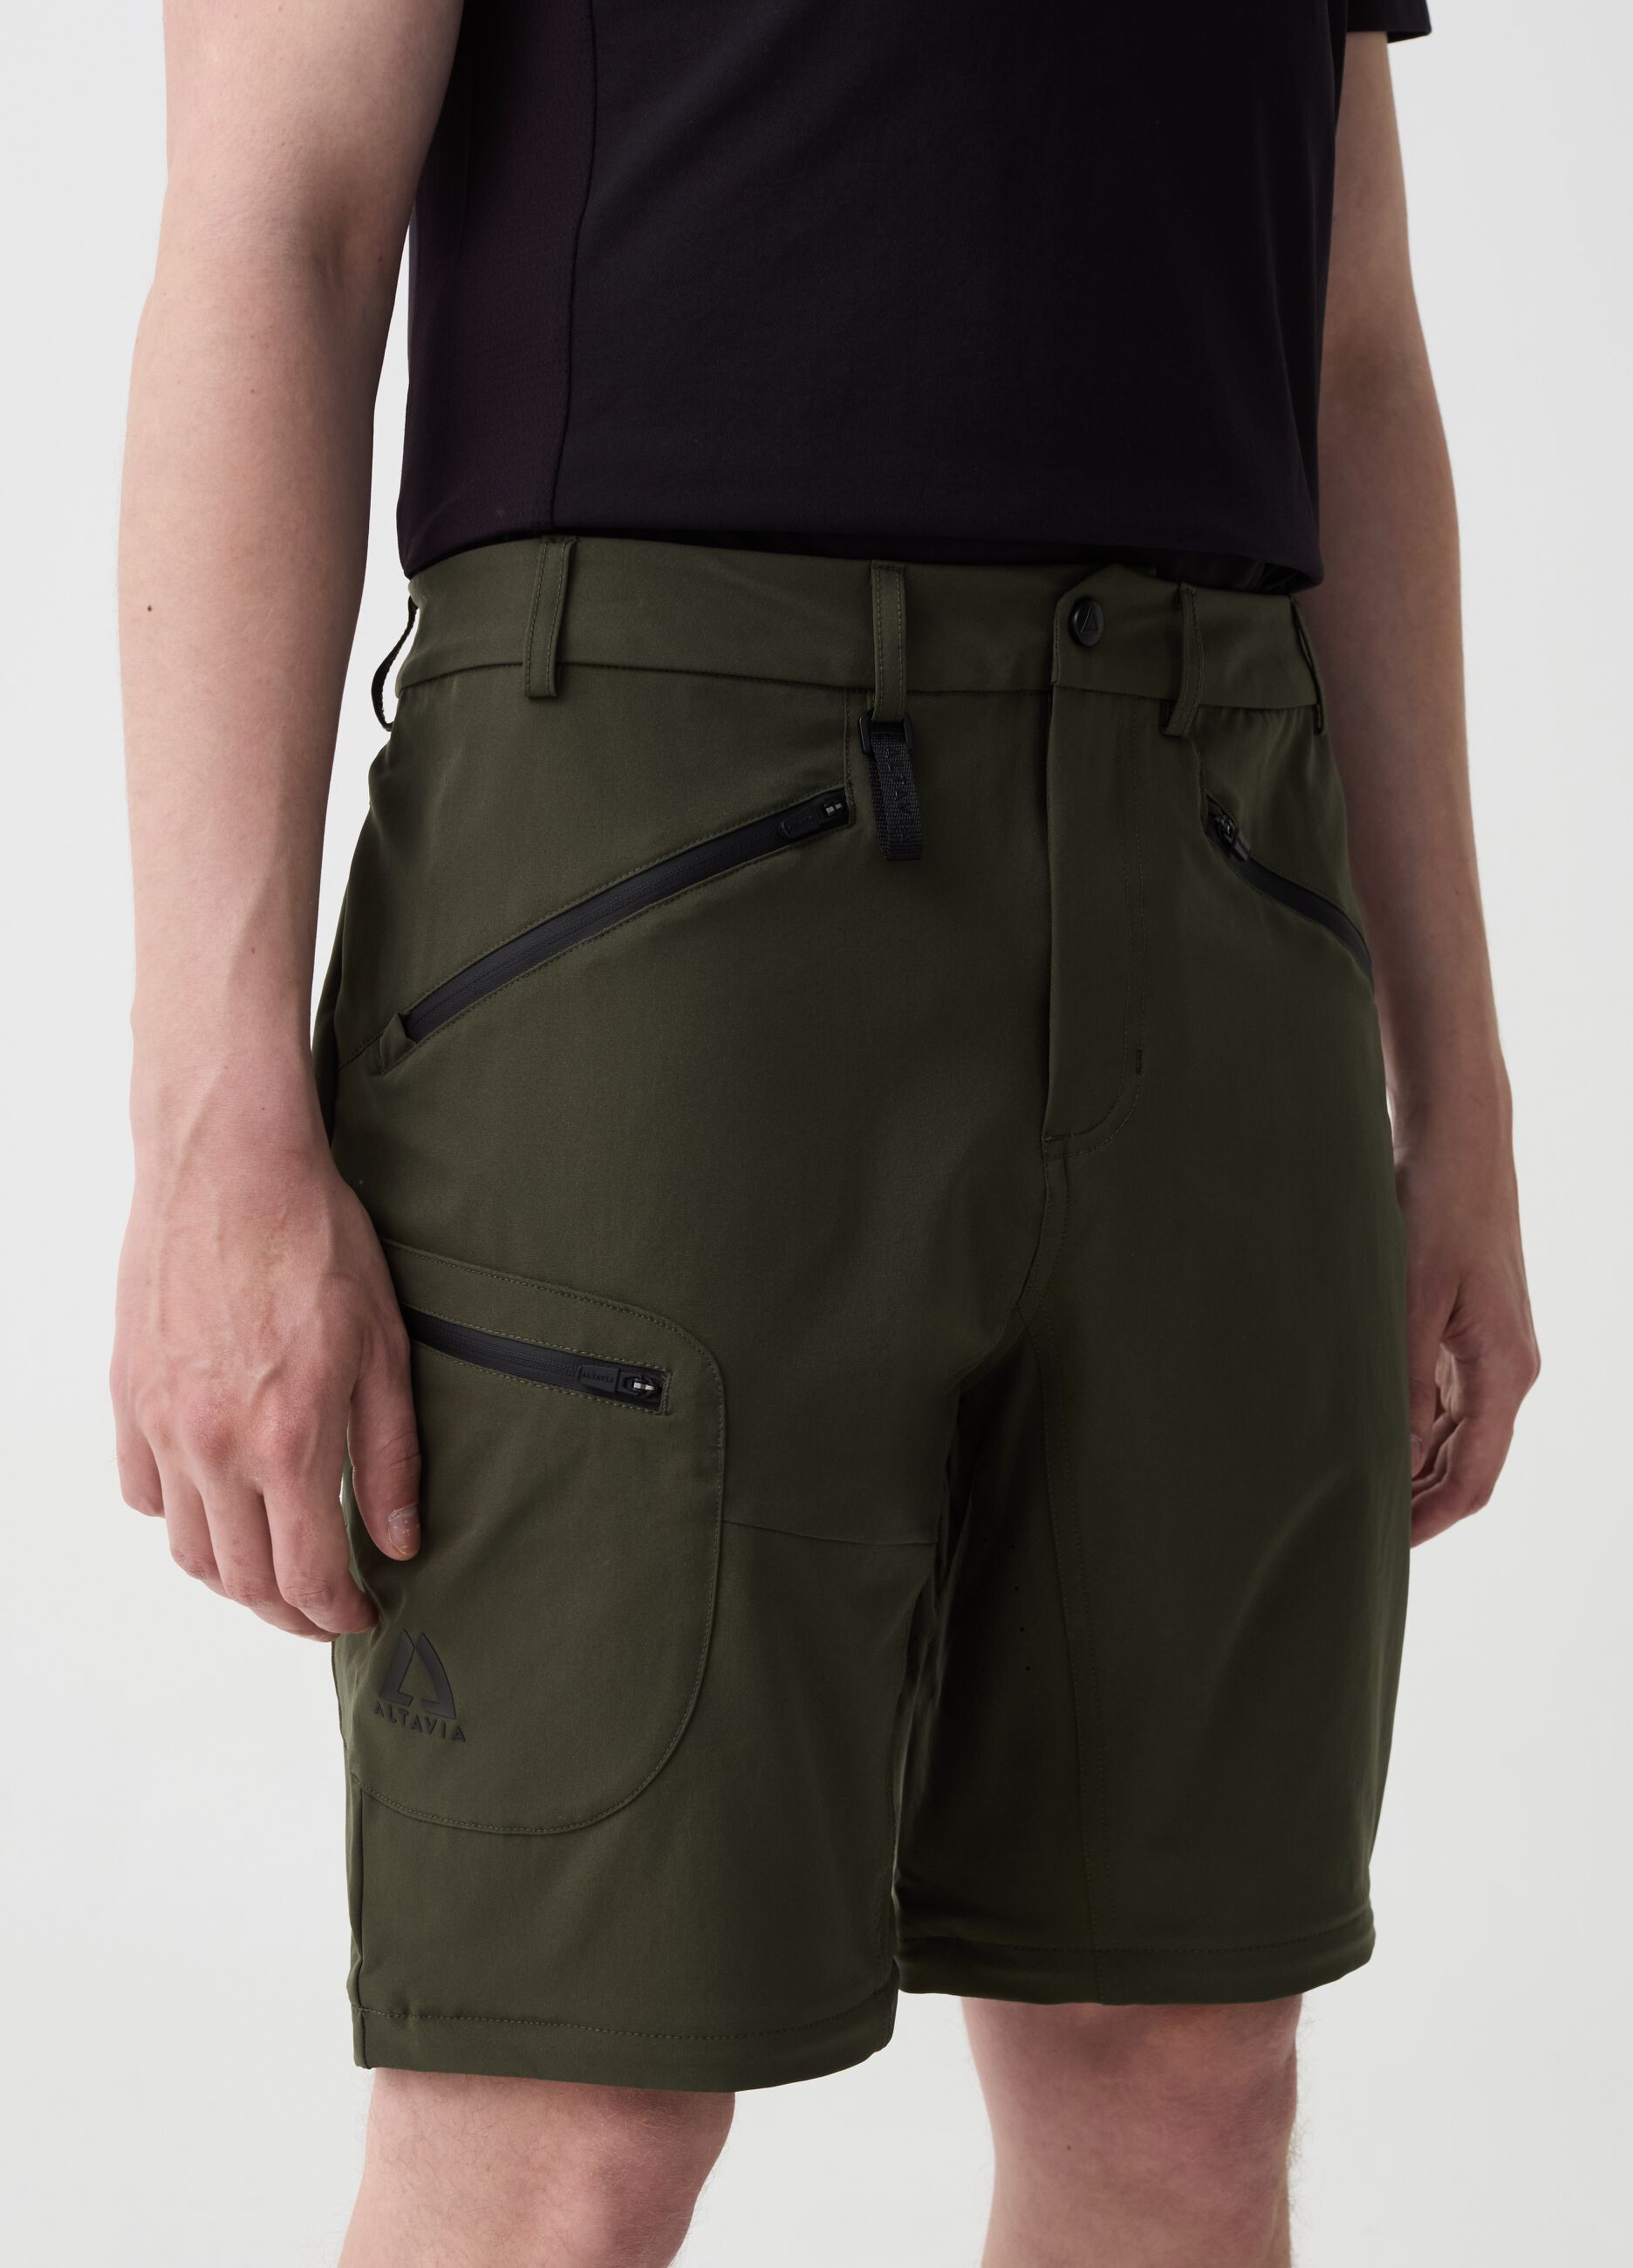 Altavia convertible hiking trousers with zip